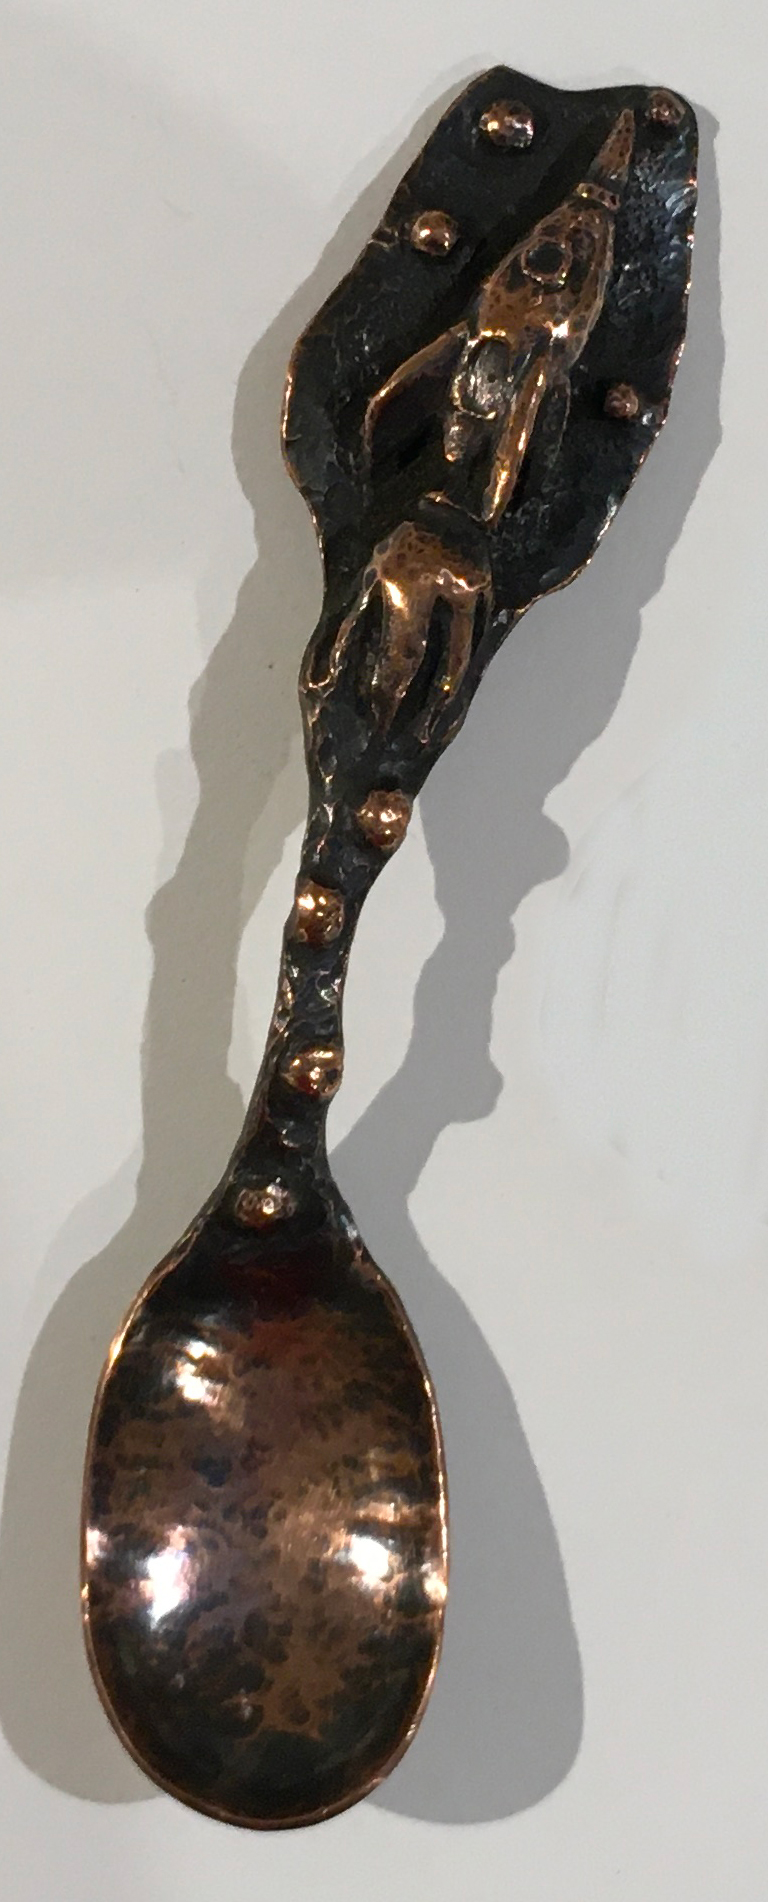 Linda Kelen, Rocket Spoon, 2018, copper, 5.75 inches, collection of the artist
